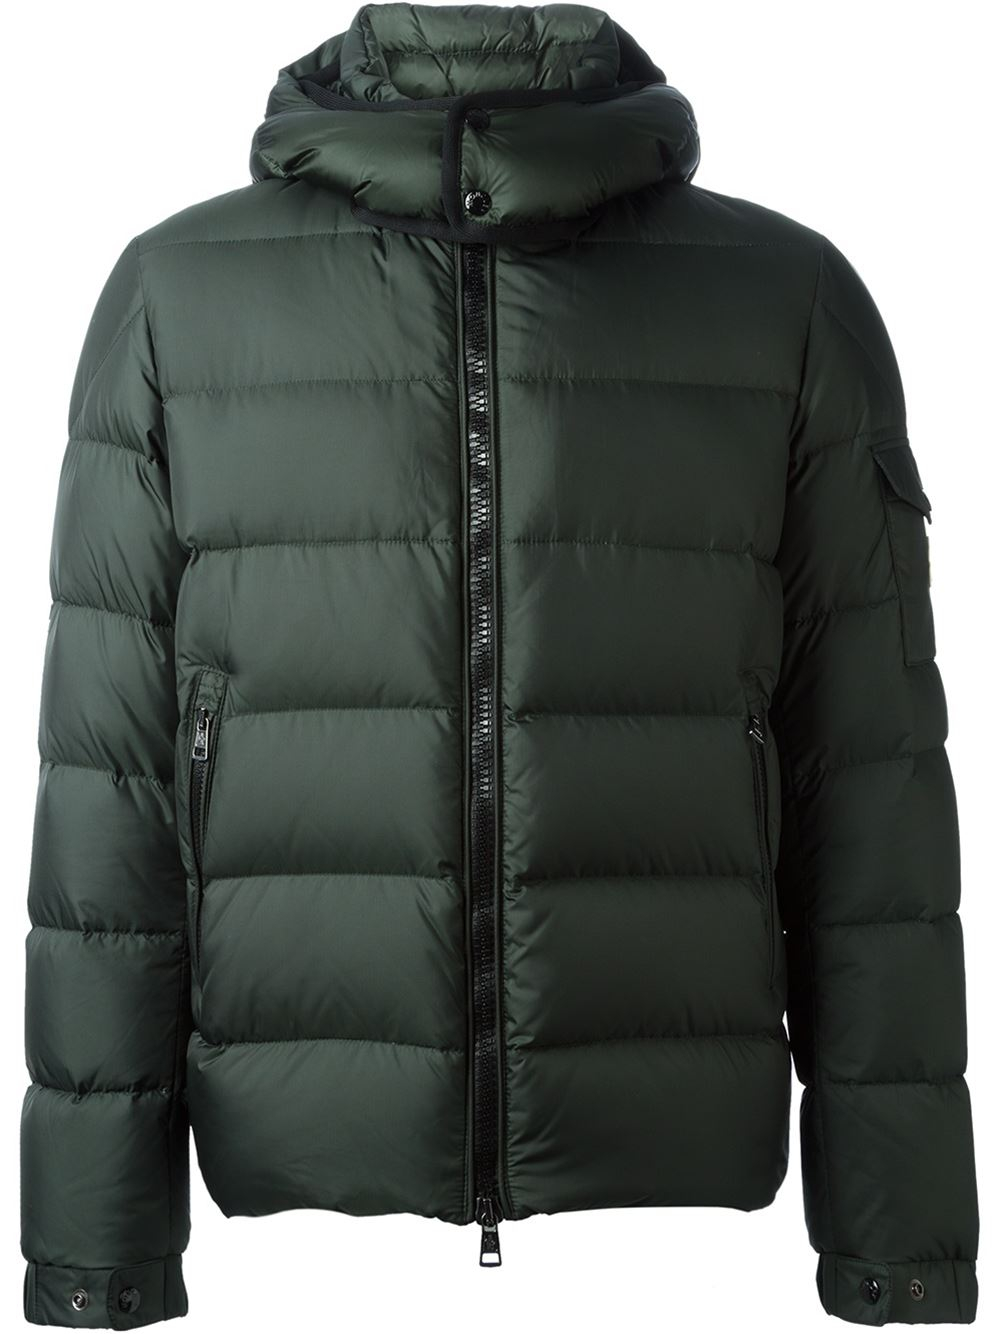 Moncler Hymalay Padded Jacket in Green for Men - Lyst